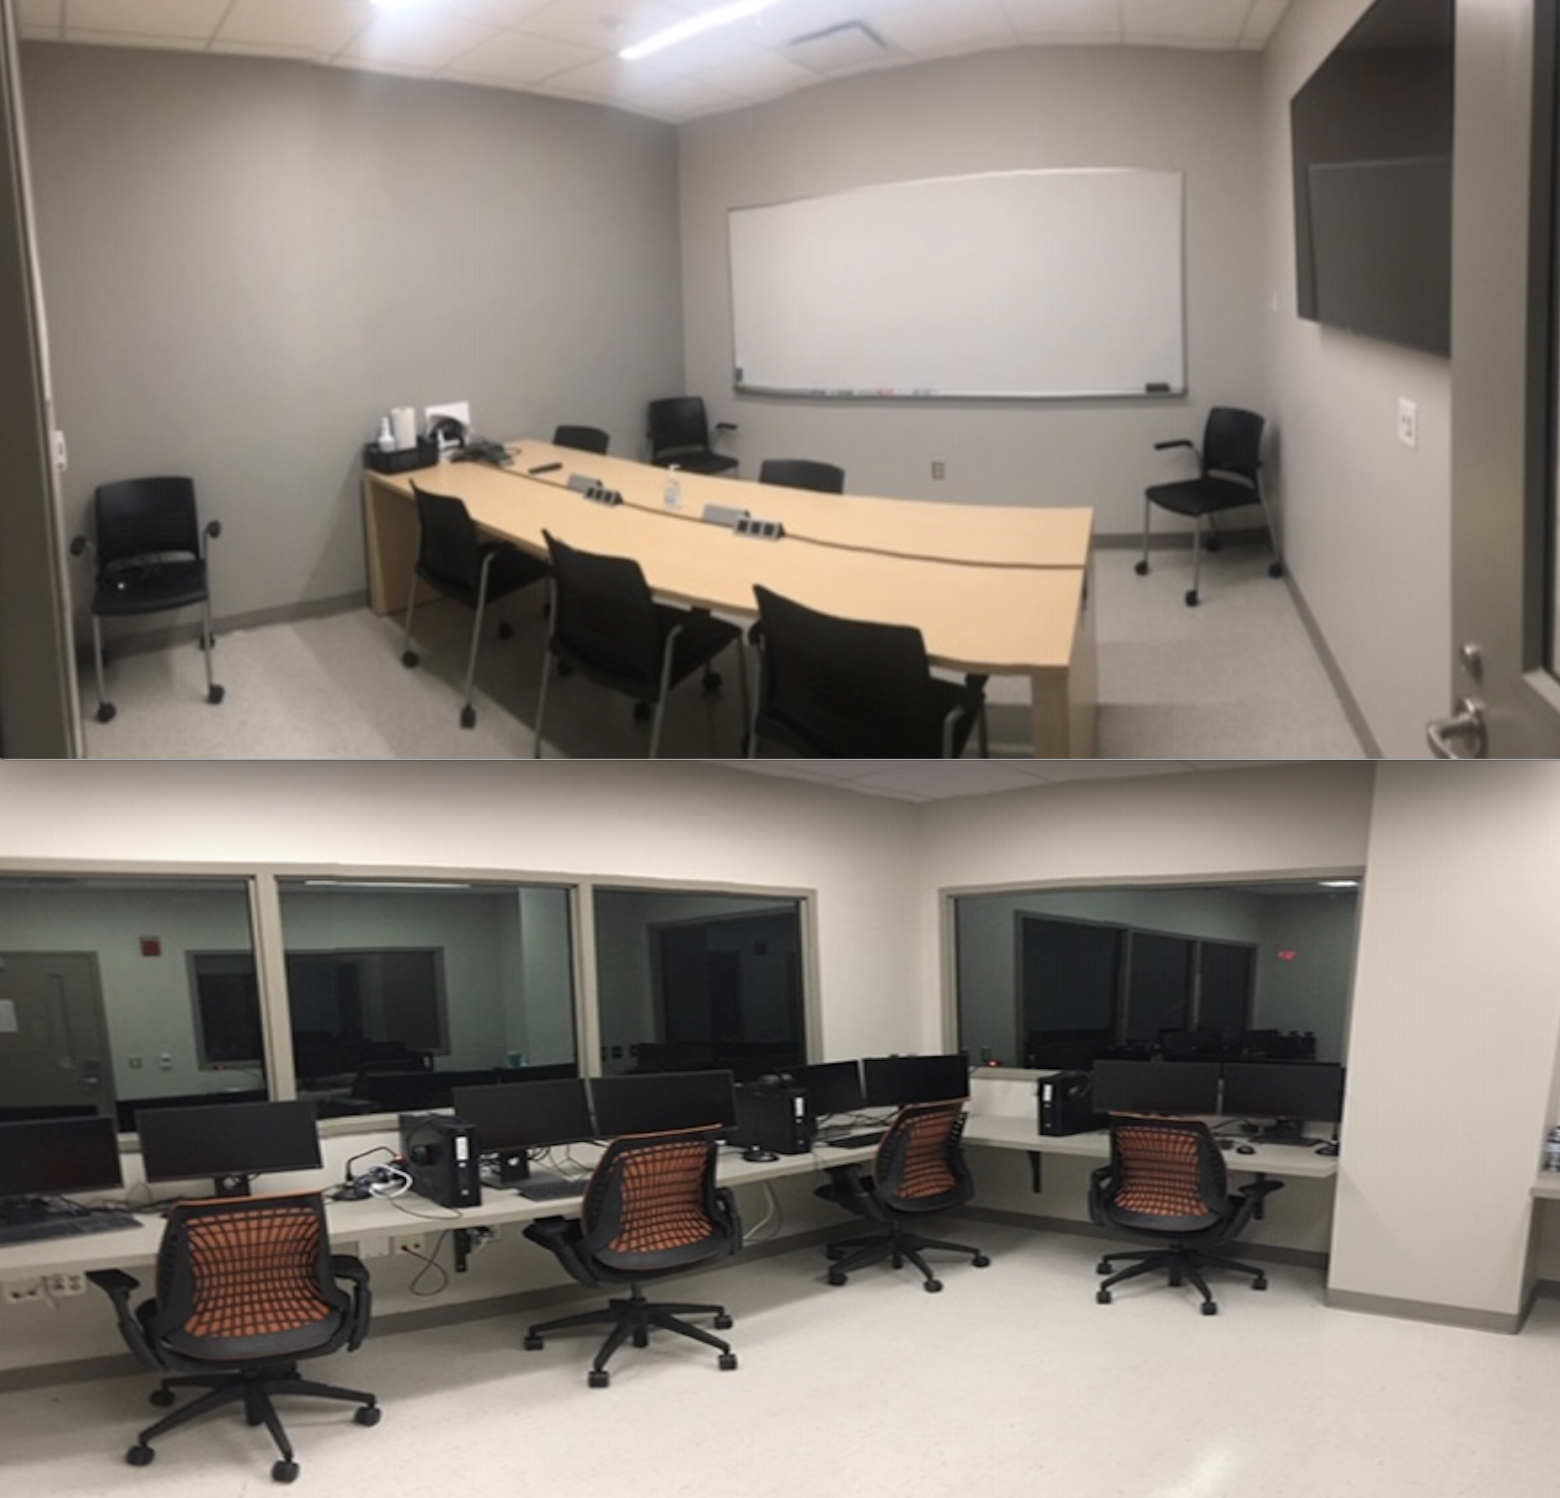 Control Room and Debriefing Room for simulation medical doctor nurse student training